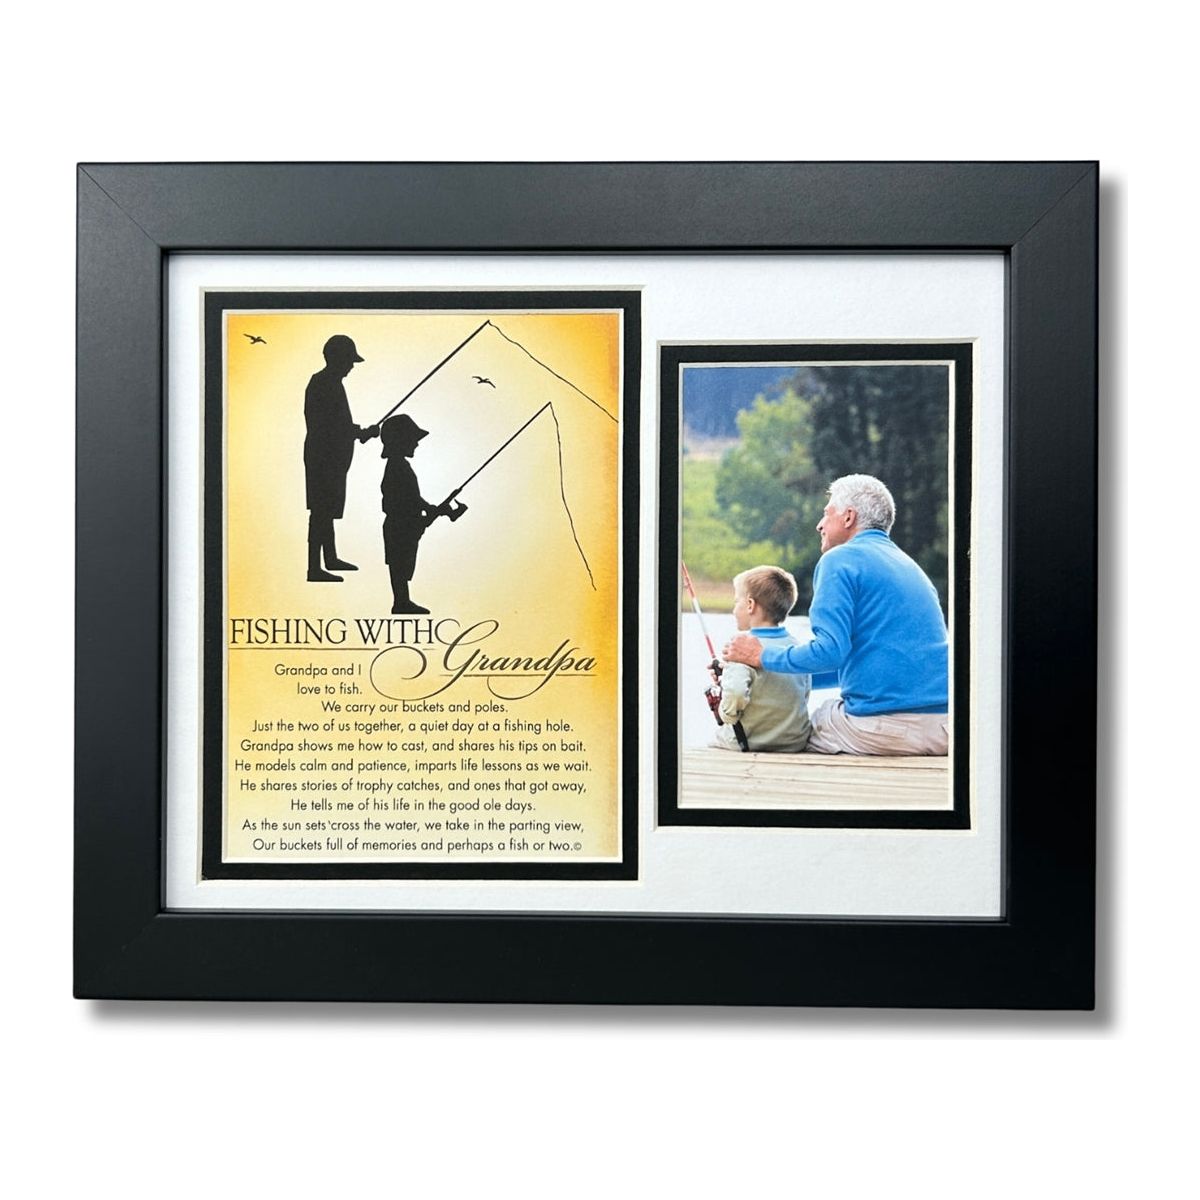 8x10 black frame with white and black double mat, includes &quot;Fishing with Grandpa&quot; artwork with poem and silhoutte of Grandpa and Grandson and space for photo.